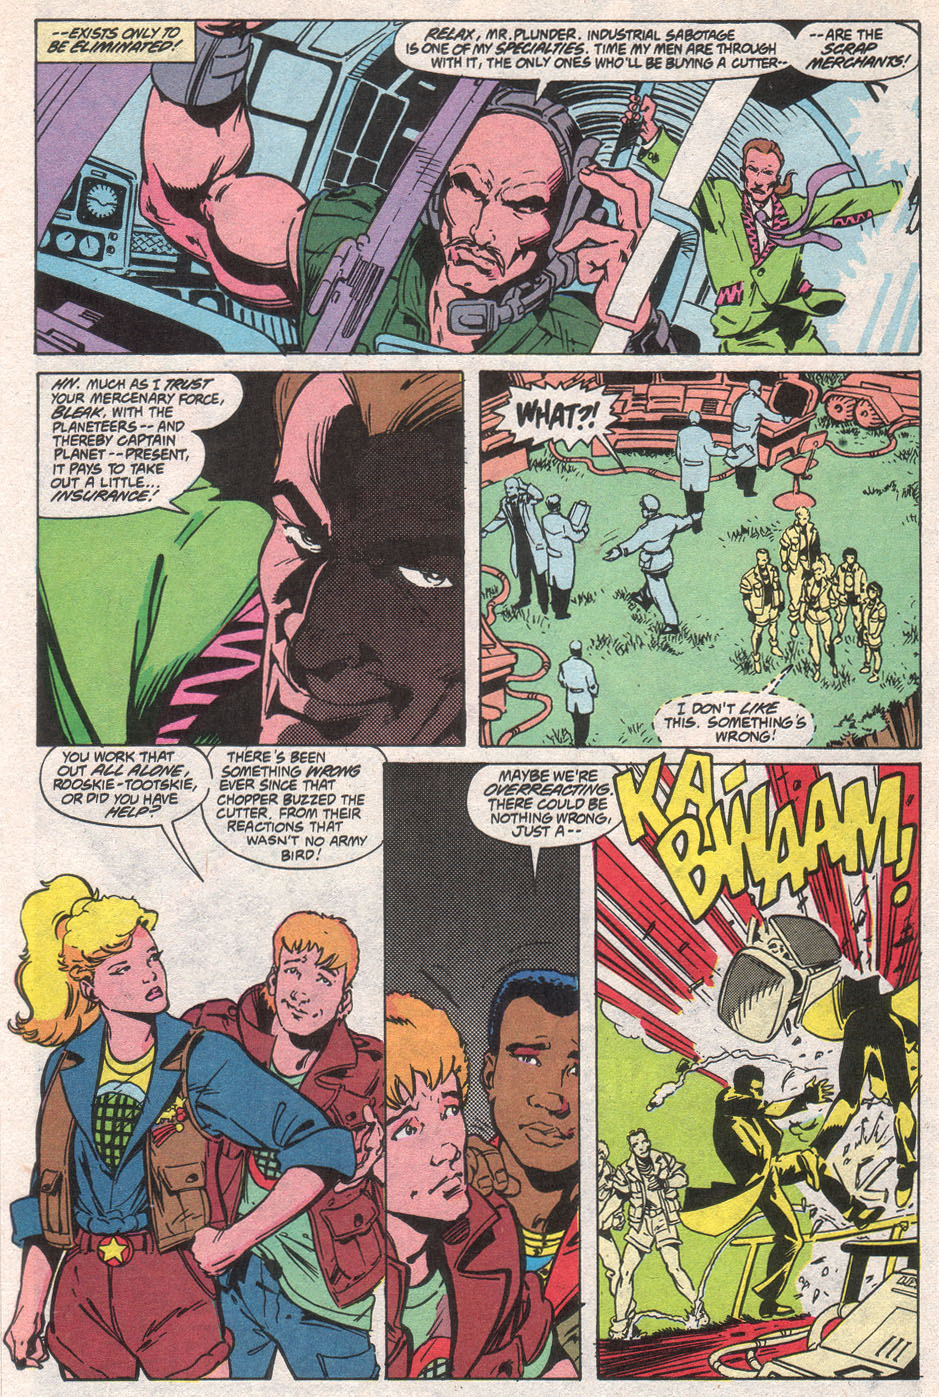 Captain Planet and the Planeteers 11 Page 9